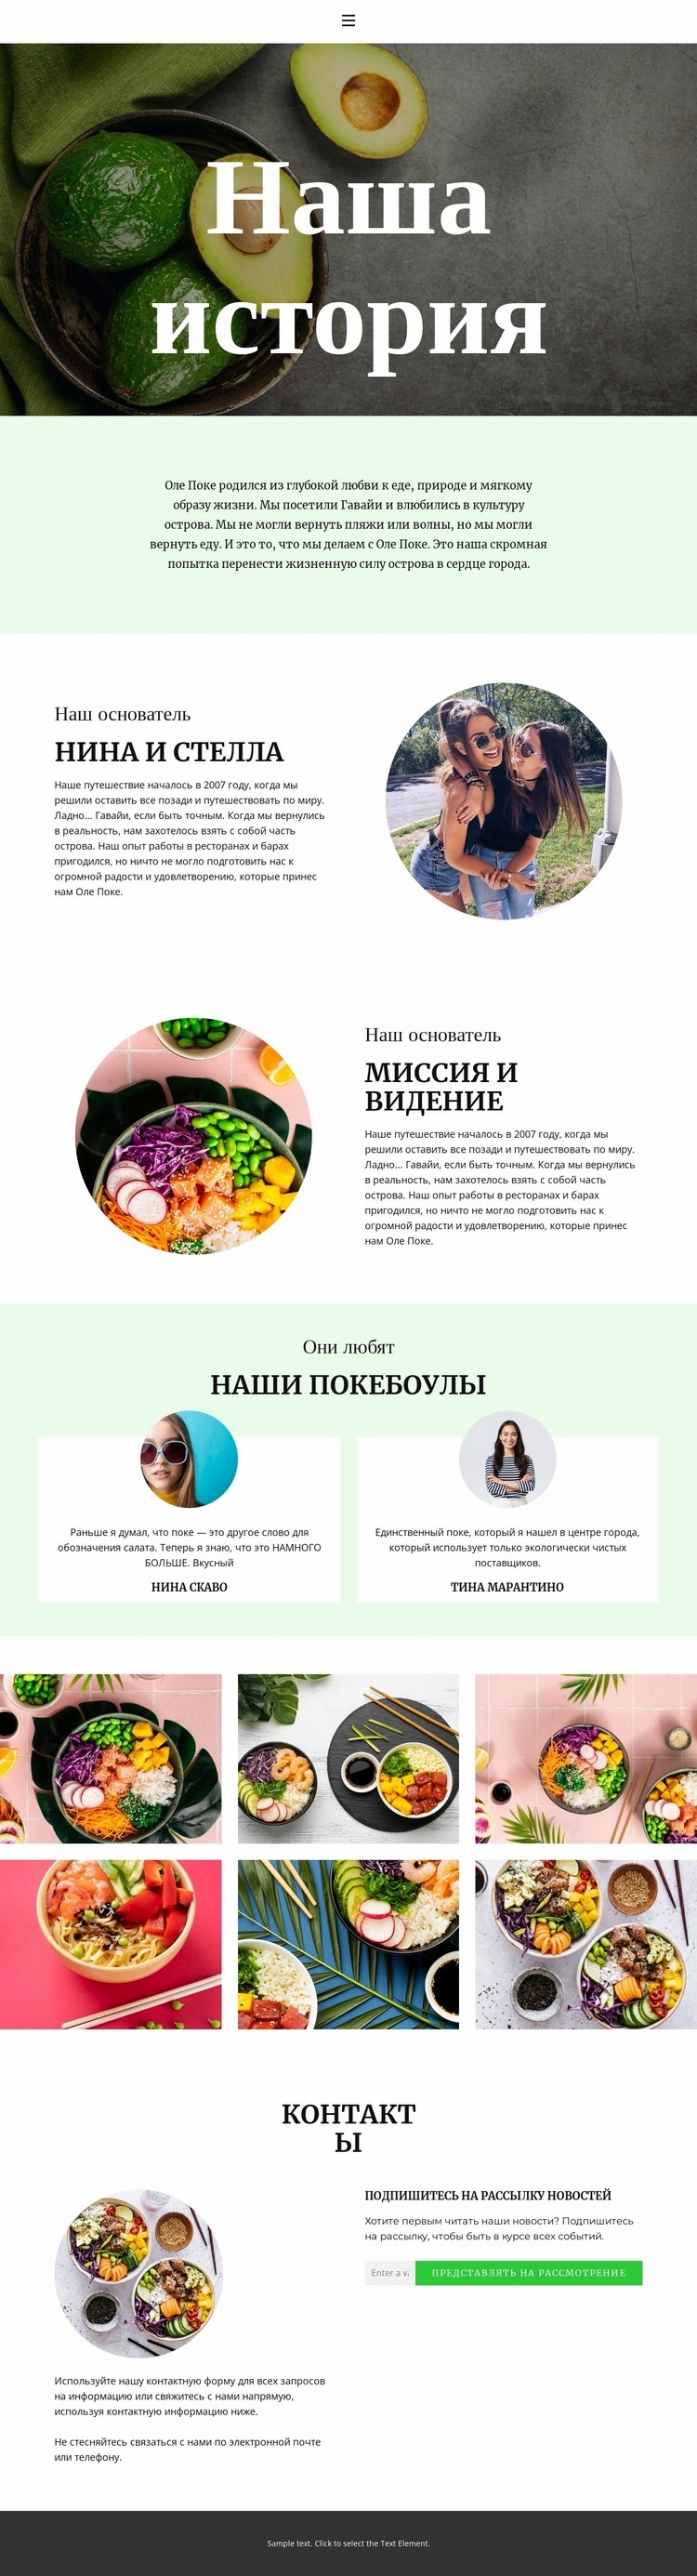 About our founder Шаблон